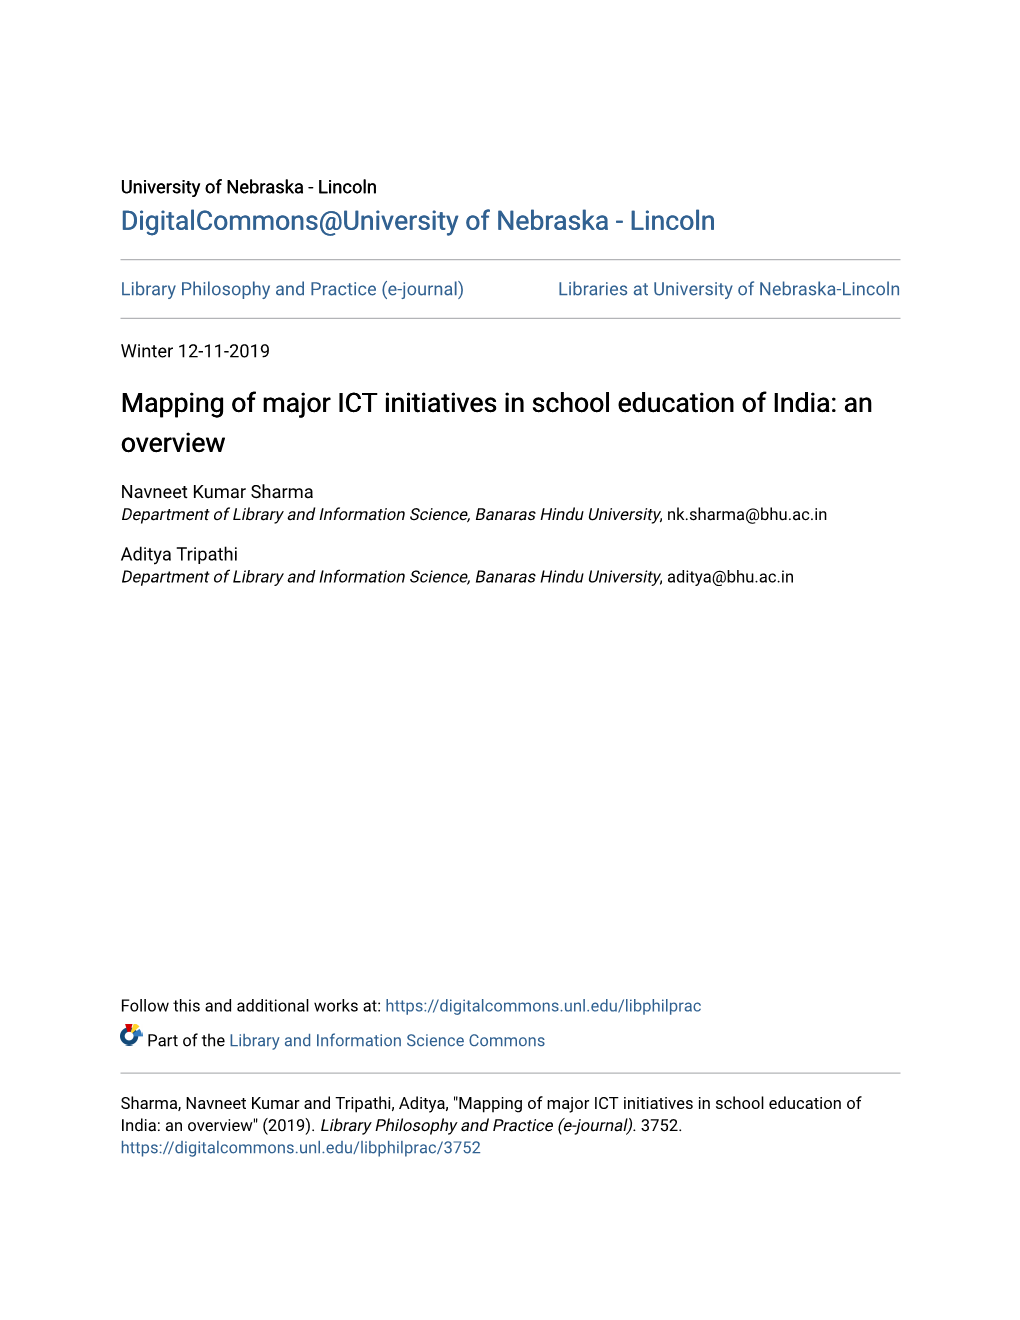 Mapping of Major ICT Initiatives in School Education of India: an Overview